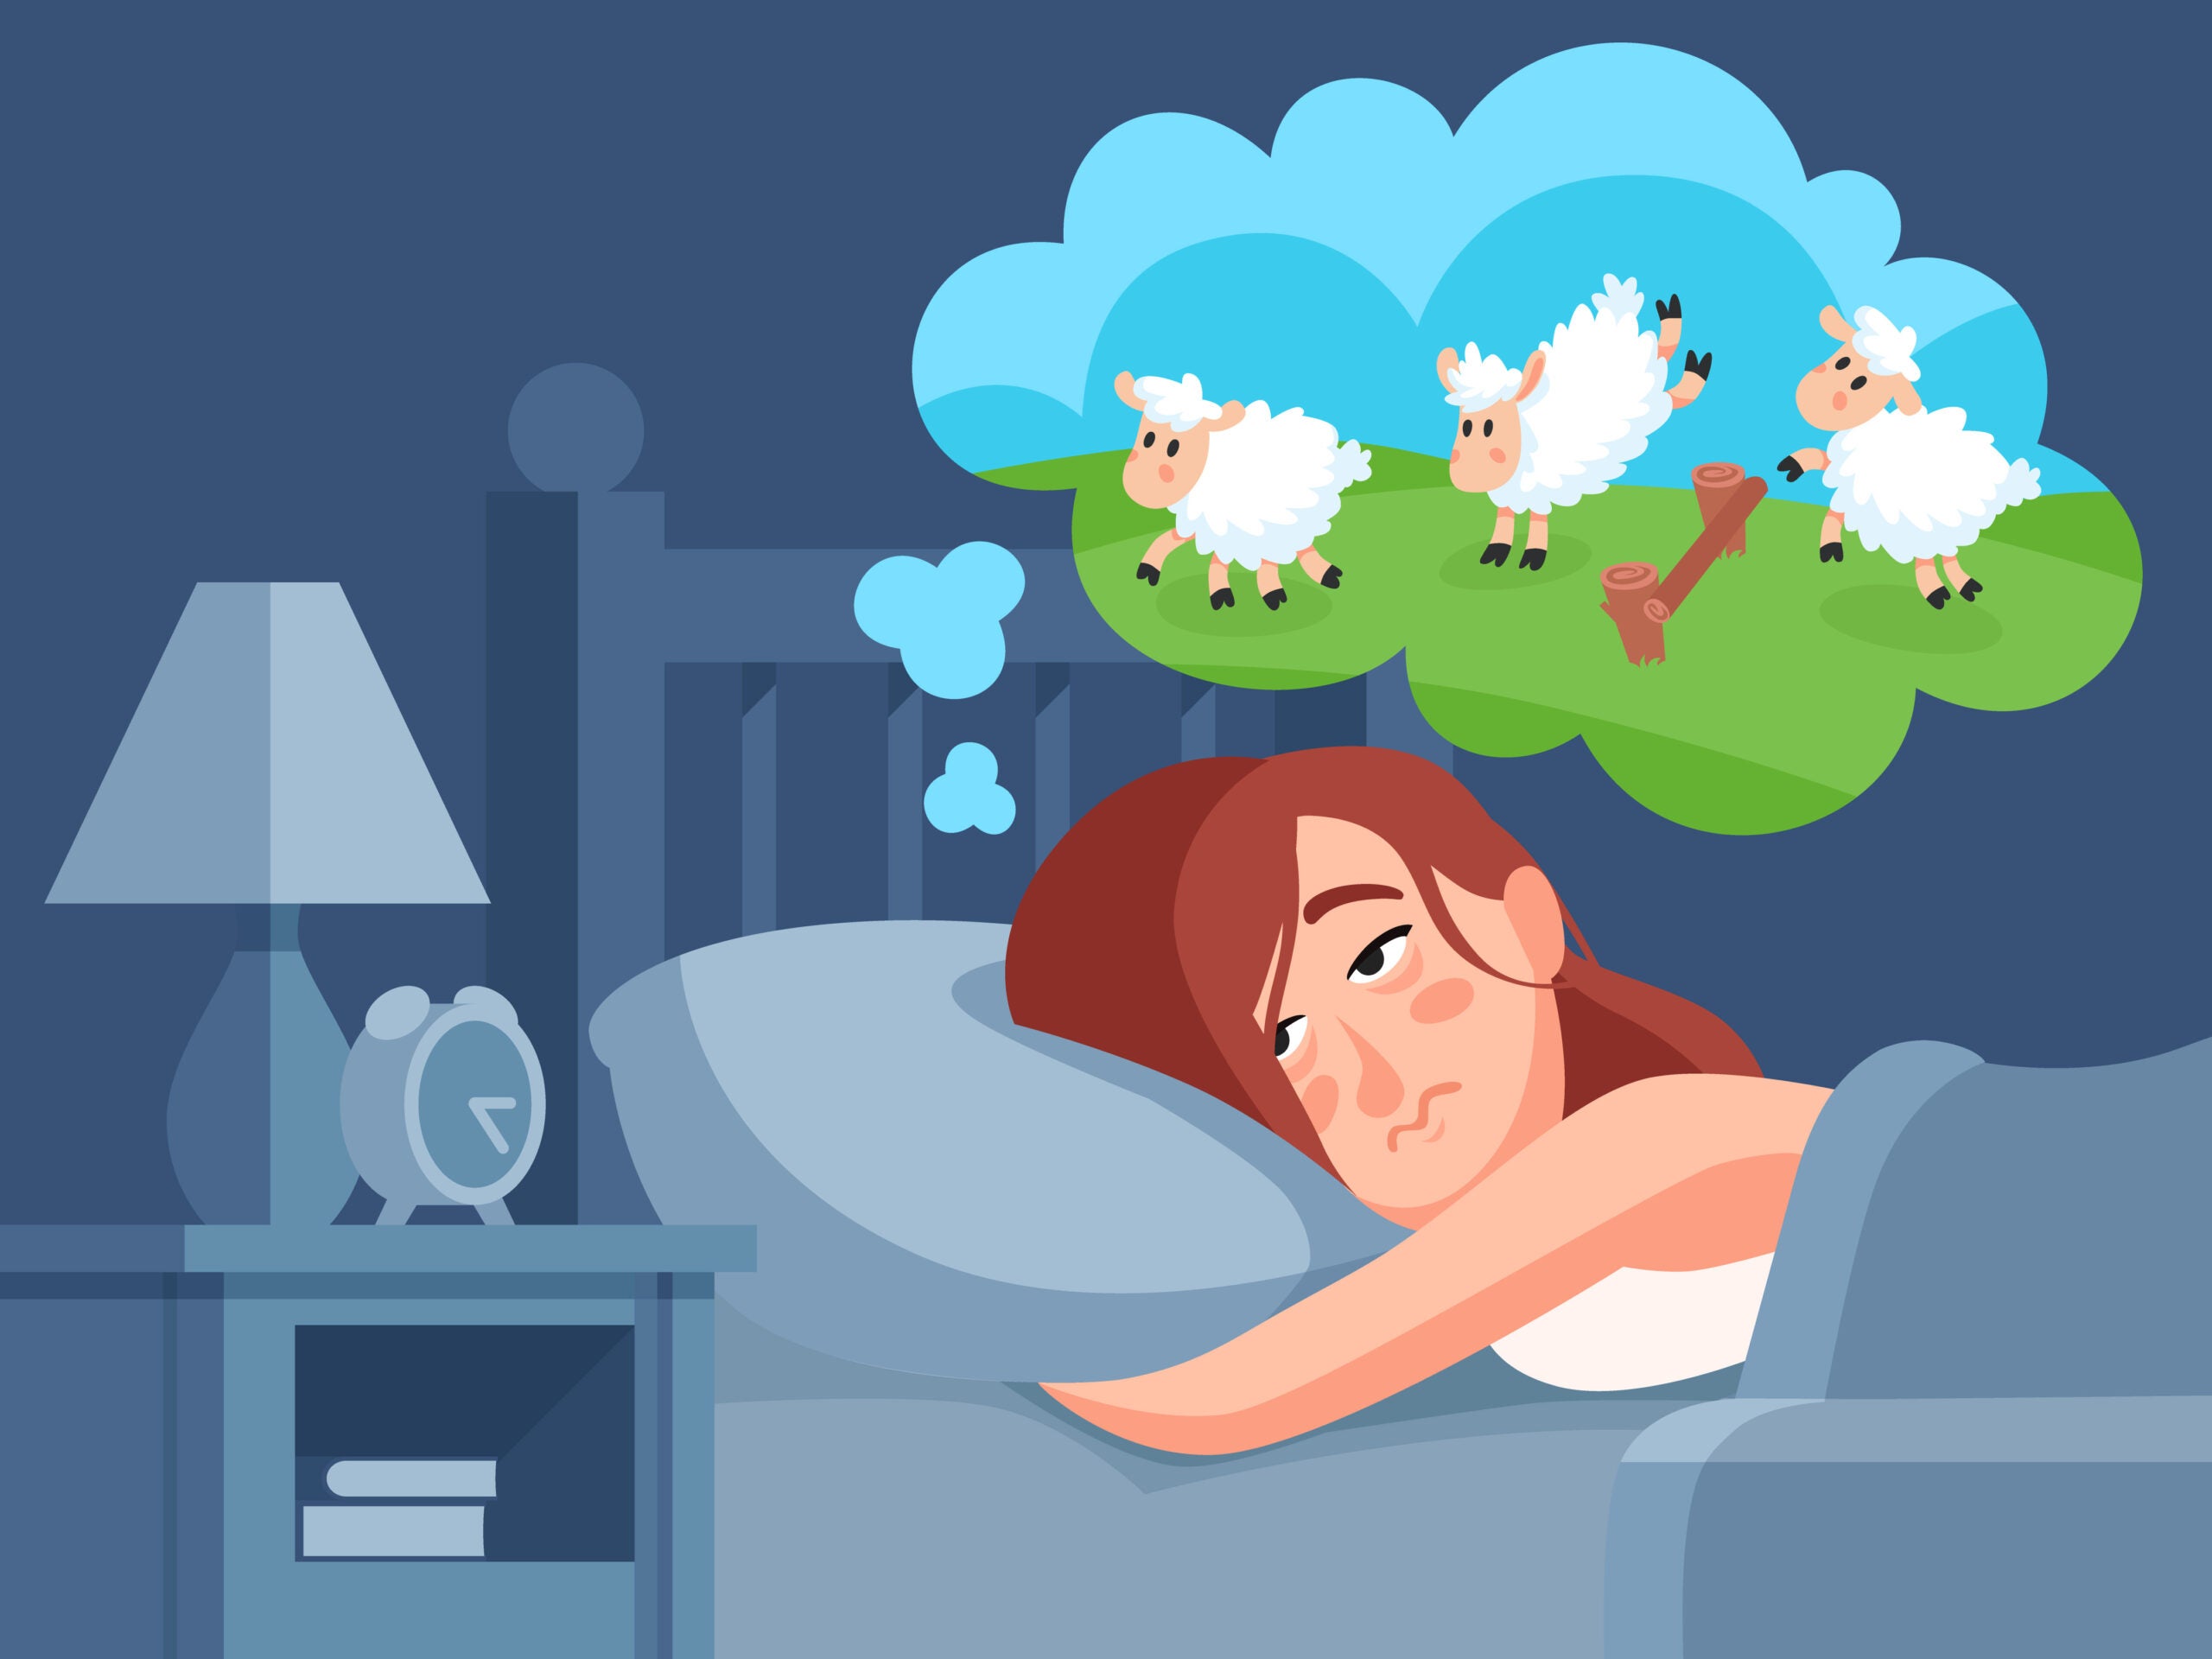 Woman counts sheep to sleep. Insomnia cartoon vector illustration. Girl counting sheep lie on pillow, insomnia and sleeplessness, sleeping and thinking